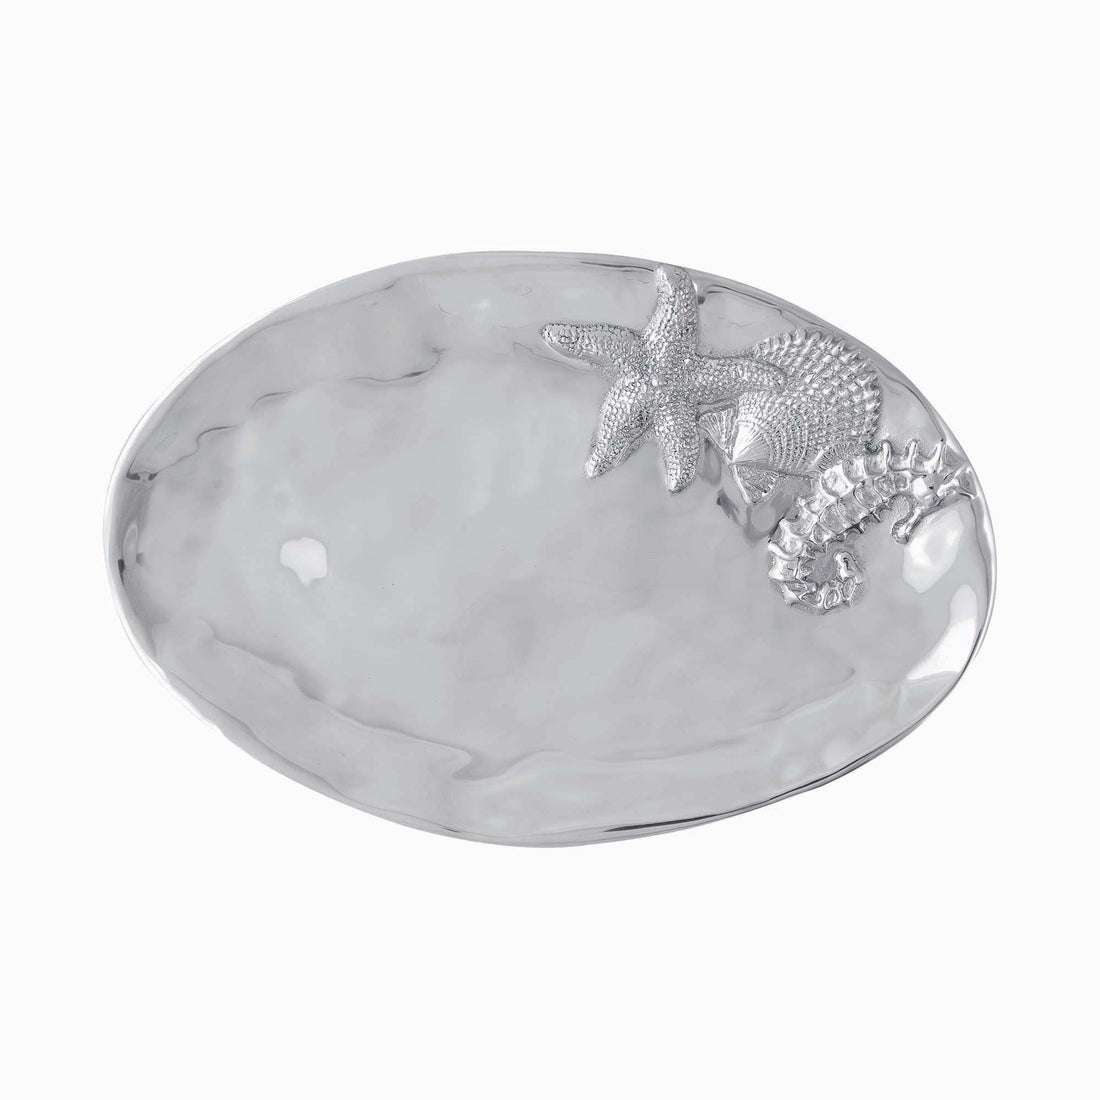 Oval Sea Server | Mariposa Serving Trays and More